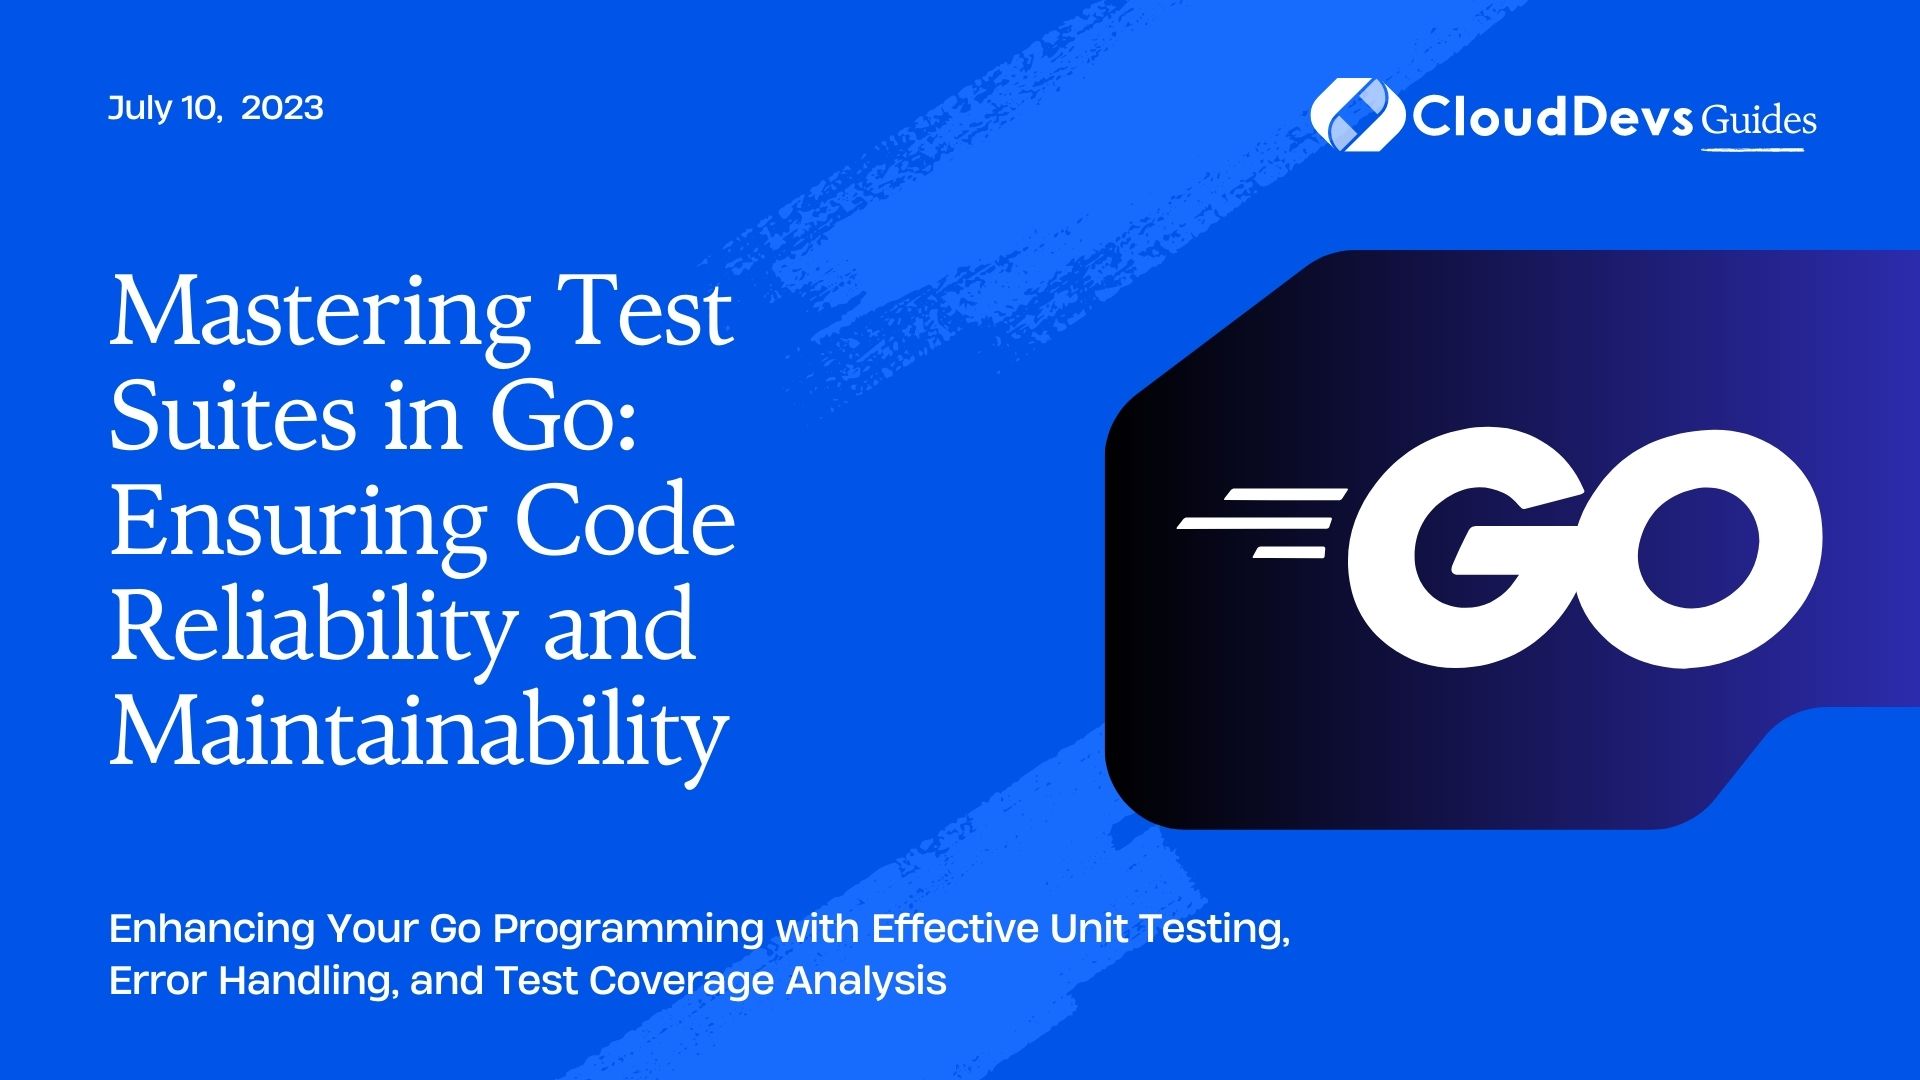 Mastering Test Suites in Go: Ensuring Code Reliability and Maintainability